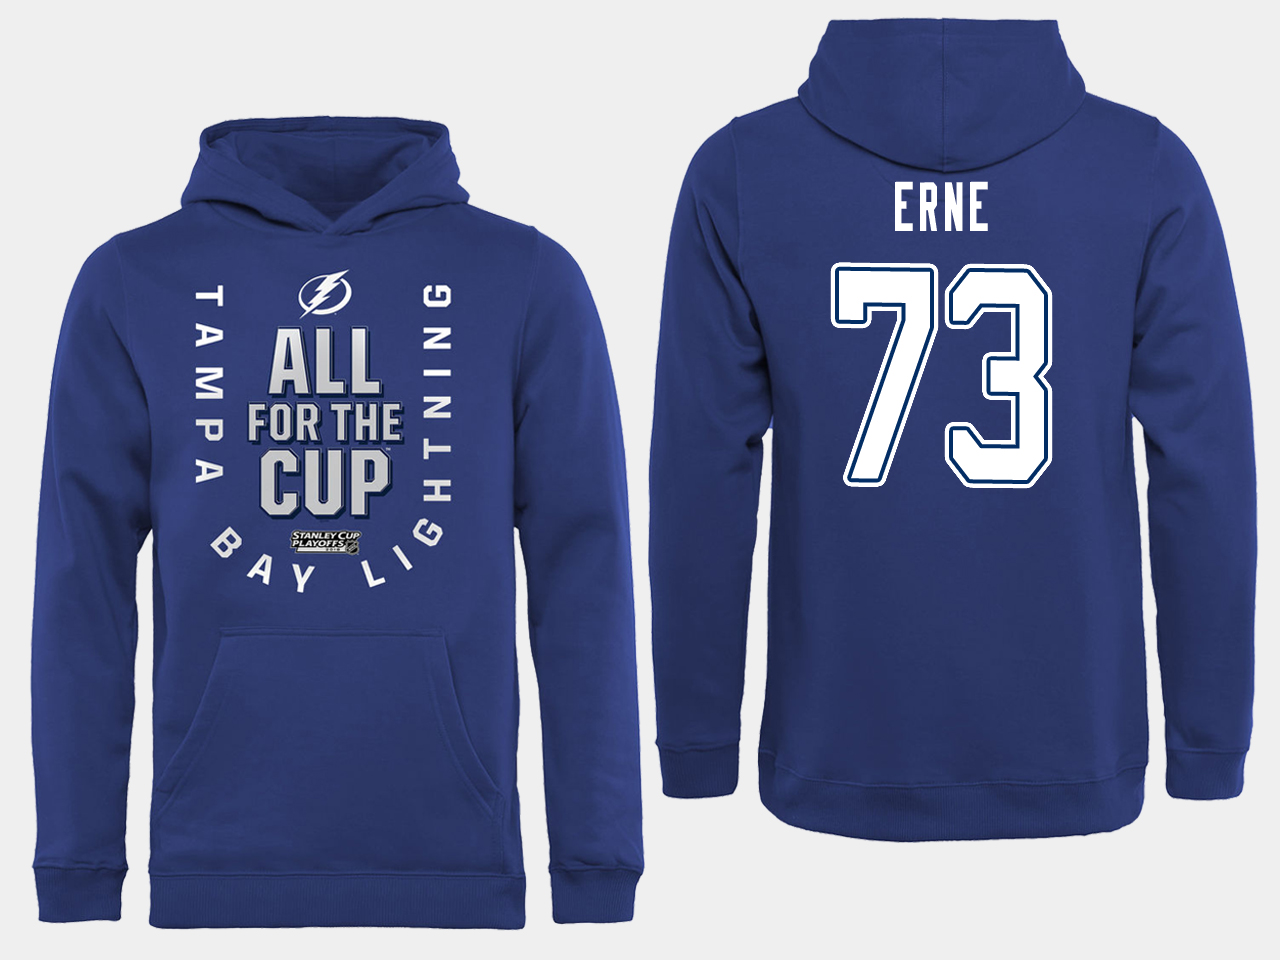 NHL Men adidas Tampa Bay Lightning 73 Erne blue All for the Cup Hoodie